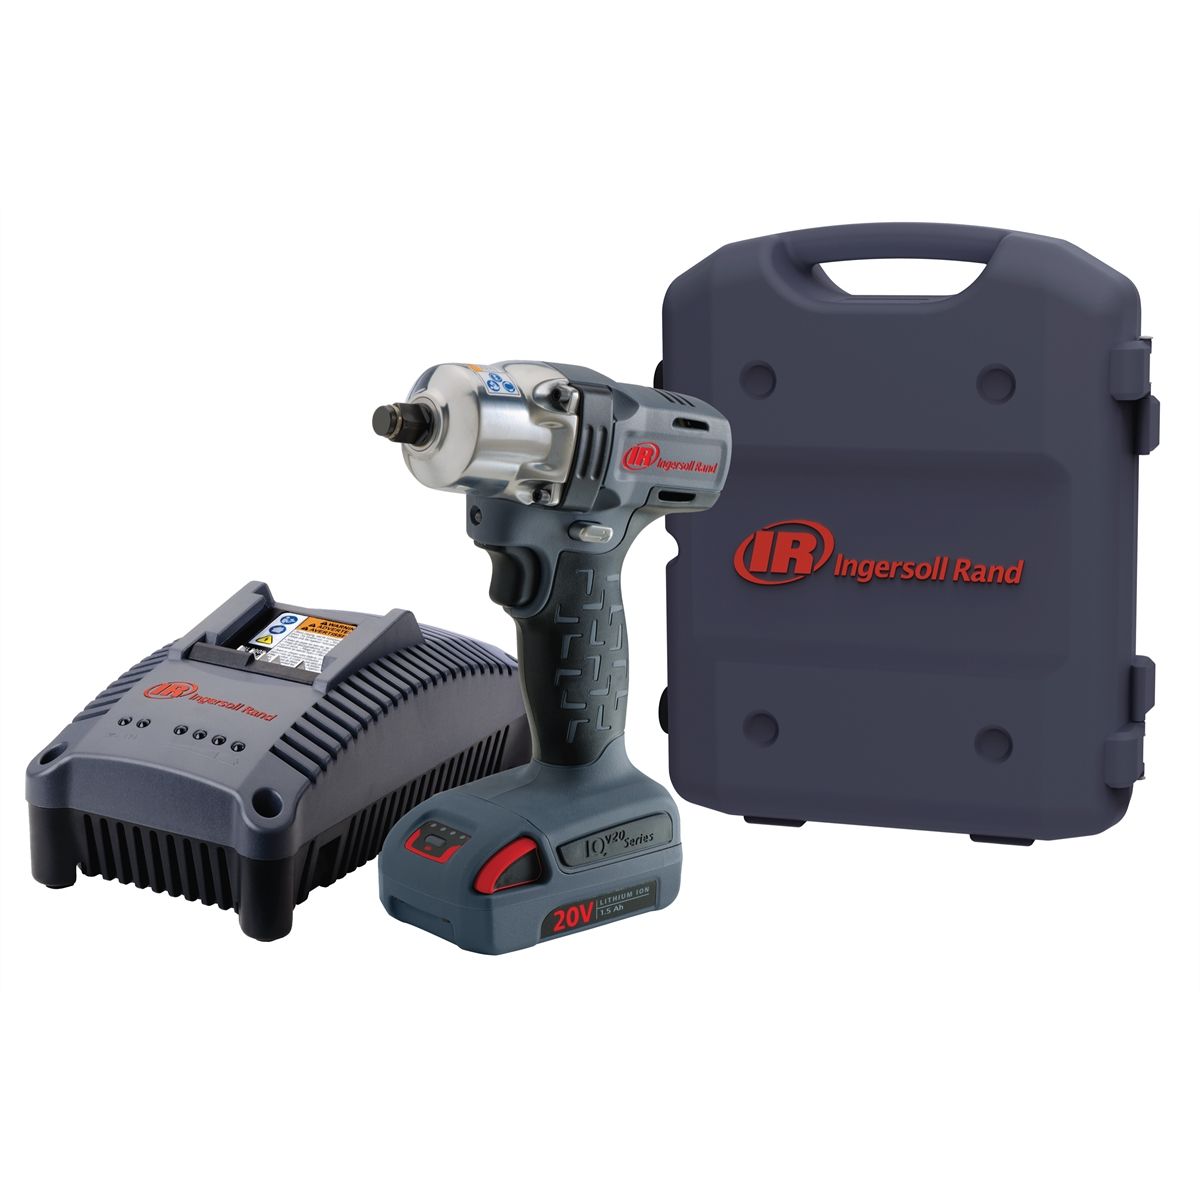 IQV20 Series 1/2 Inch Cordless Impact Wrench Kit w 1 Battery